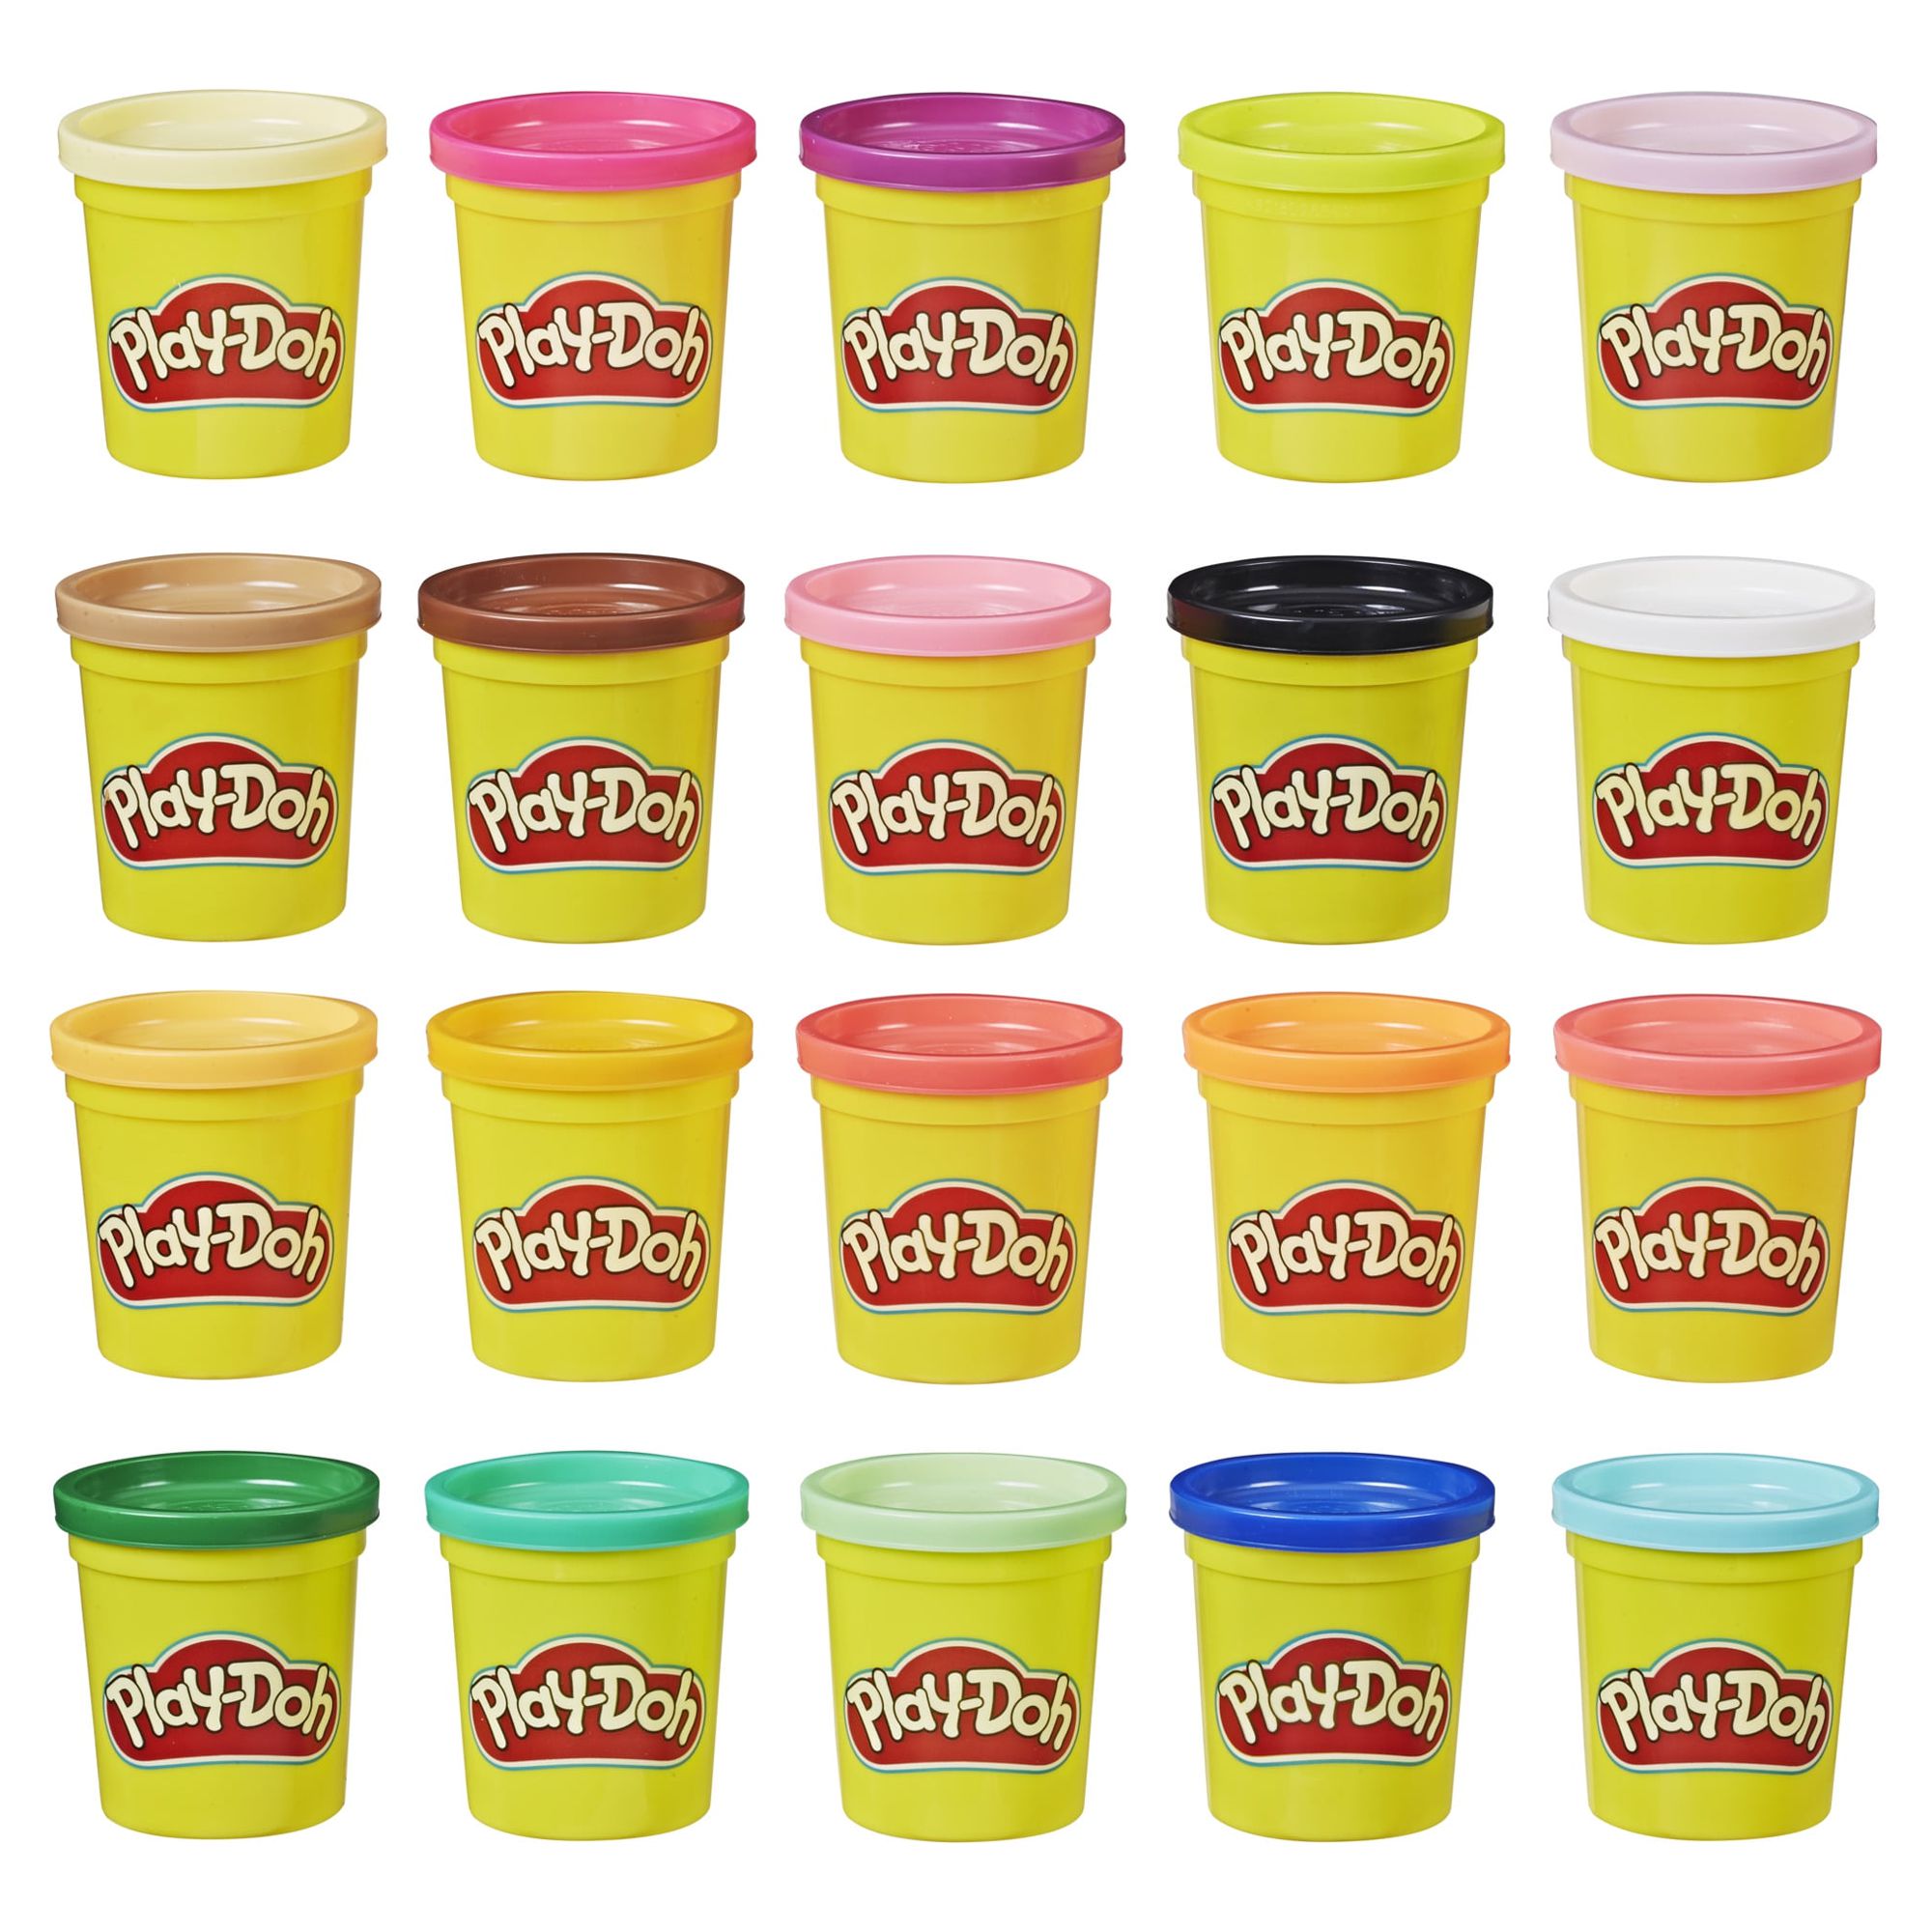 Play-Doh Super Color 20-Pack of 3-Ounce Cans, Kids Toys, Easter Basket Stuffers, Egg Fillers - image 2 of 4